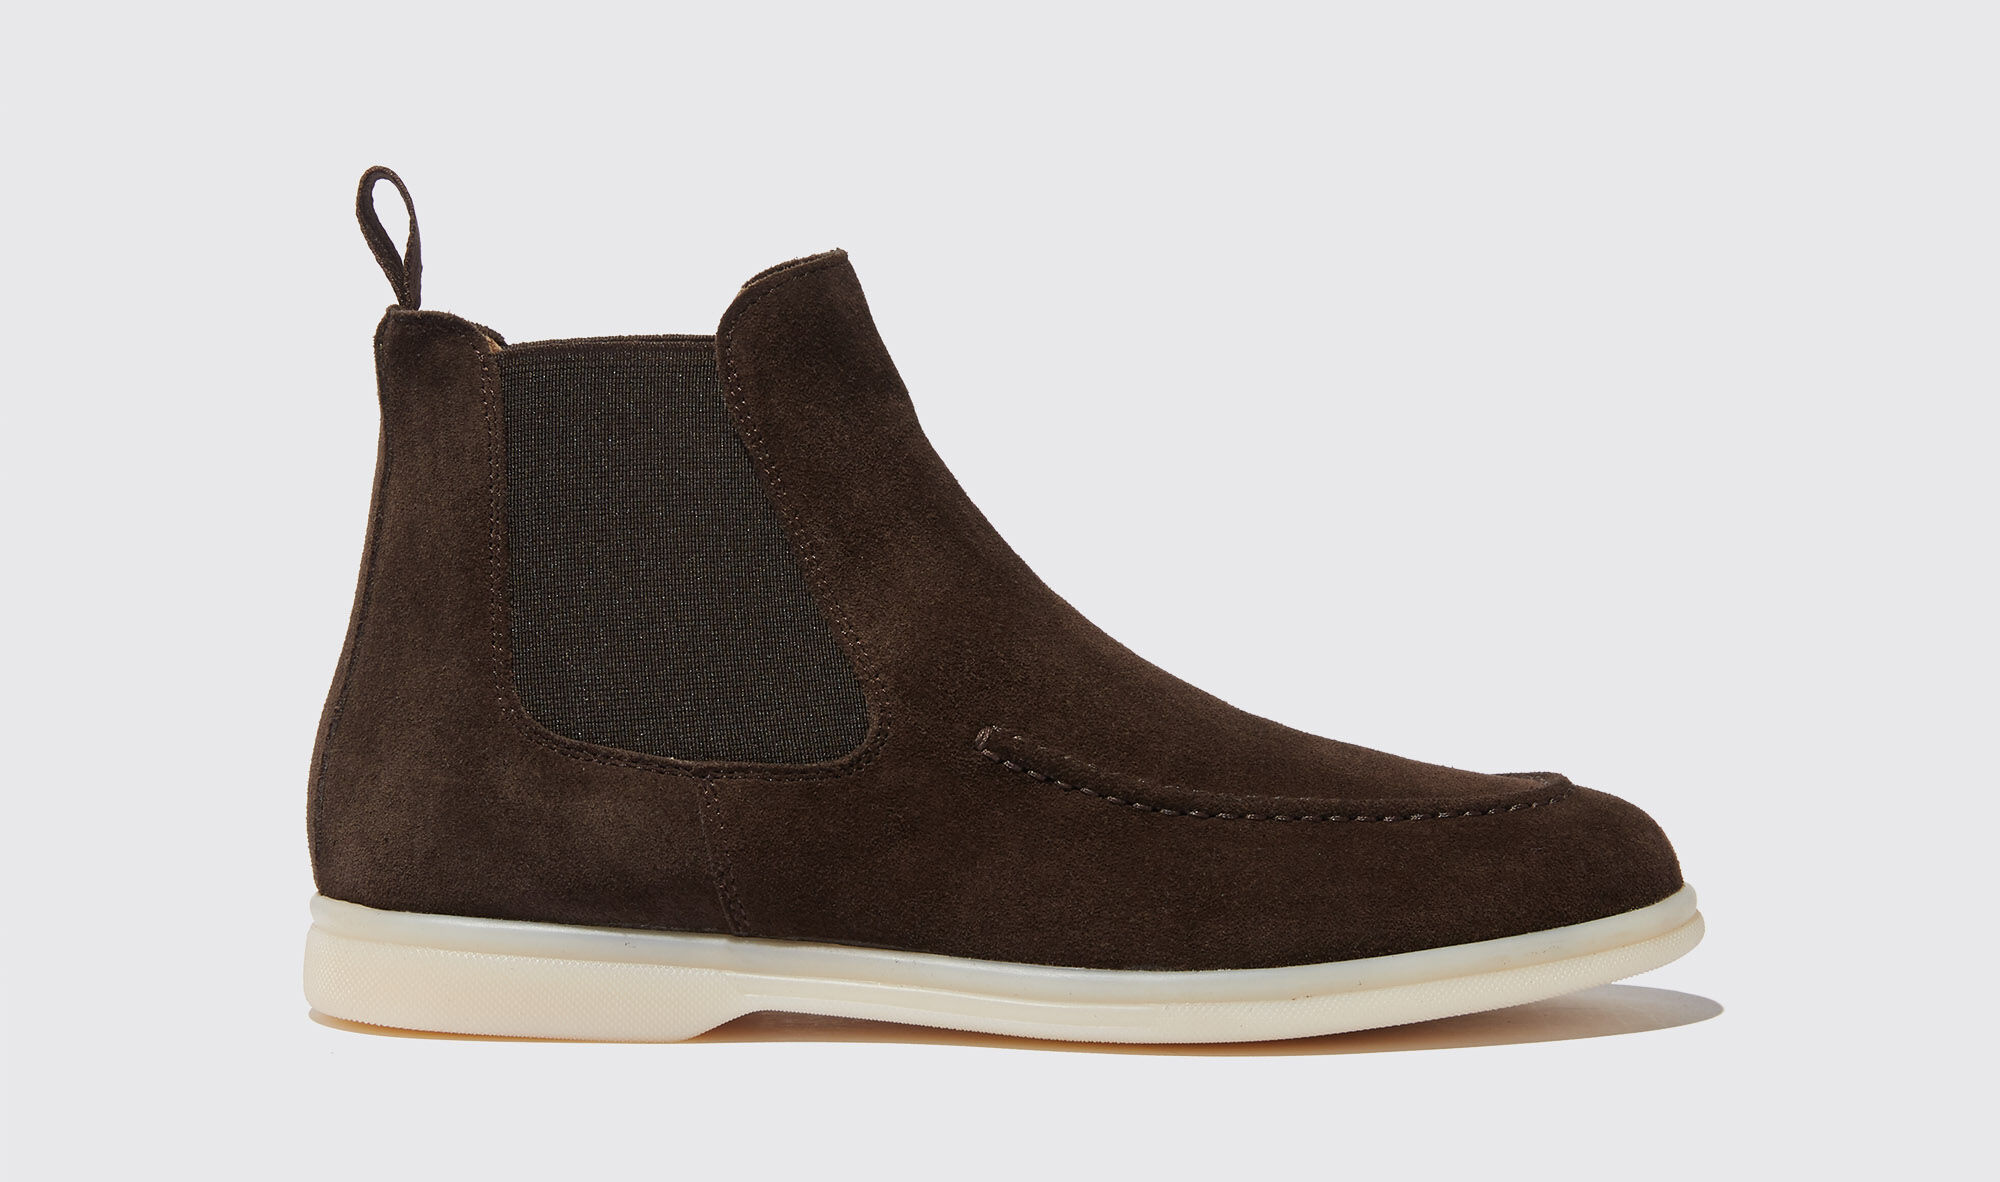 Scarosso Eugenia Moro Scamosciata - Donna Chelsea Boots Brown - Suede Leather 39,5